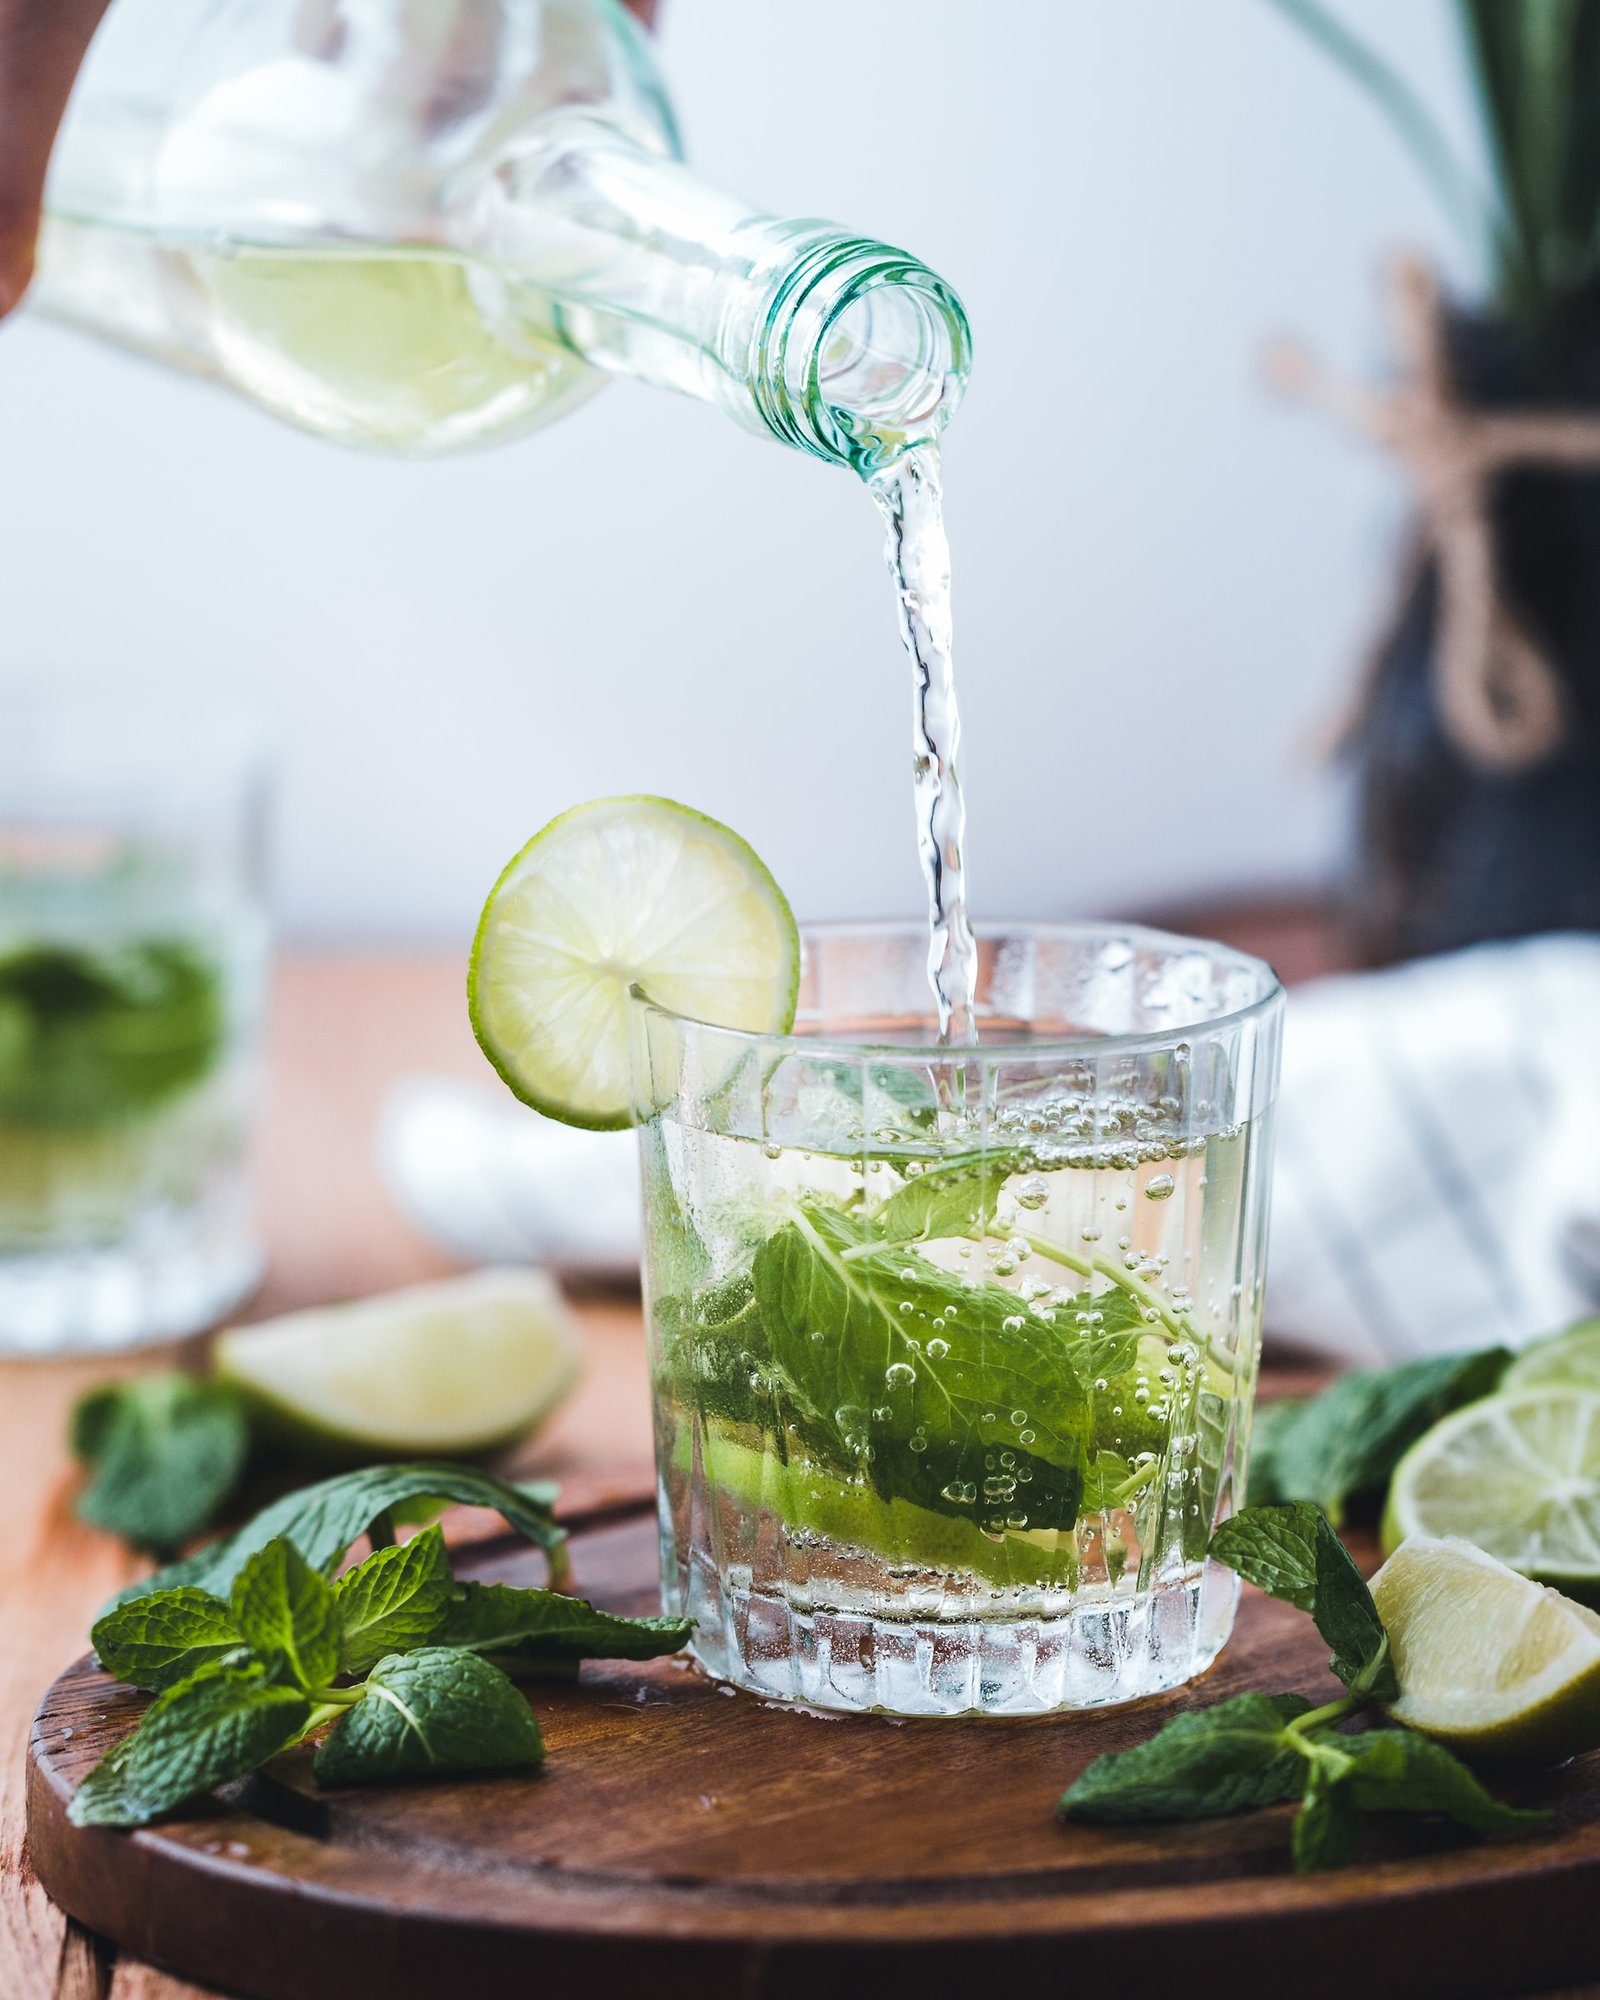 Poring water into a glass with mint and lime